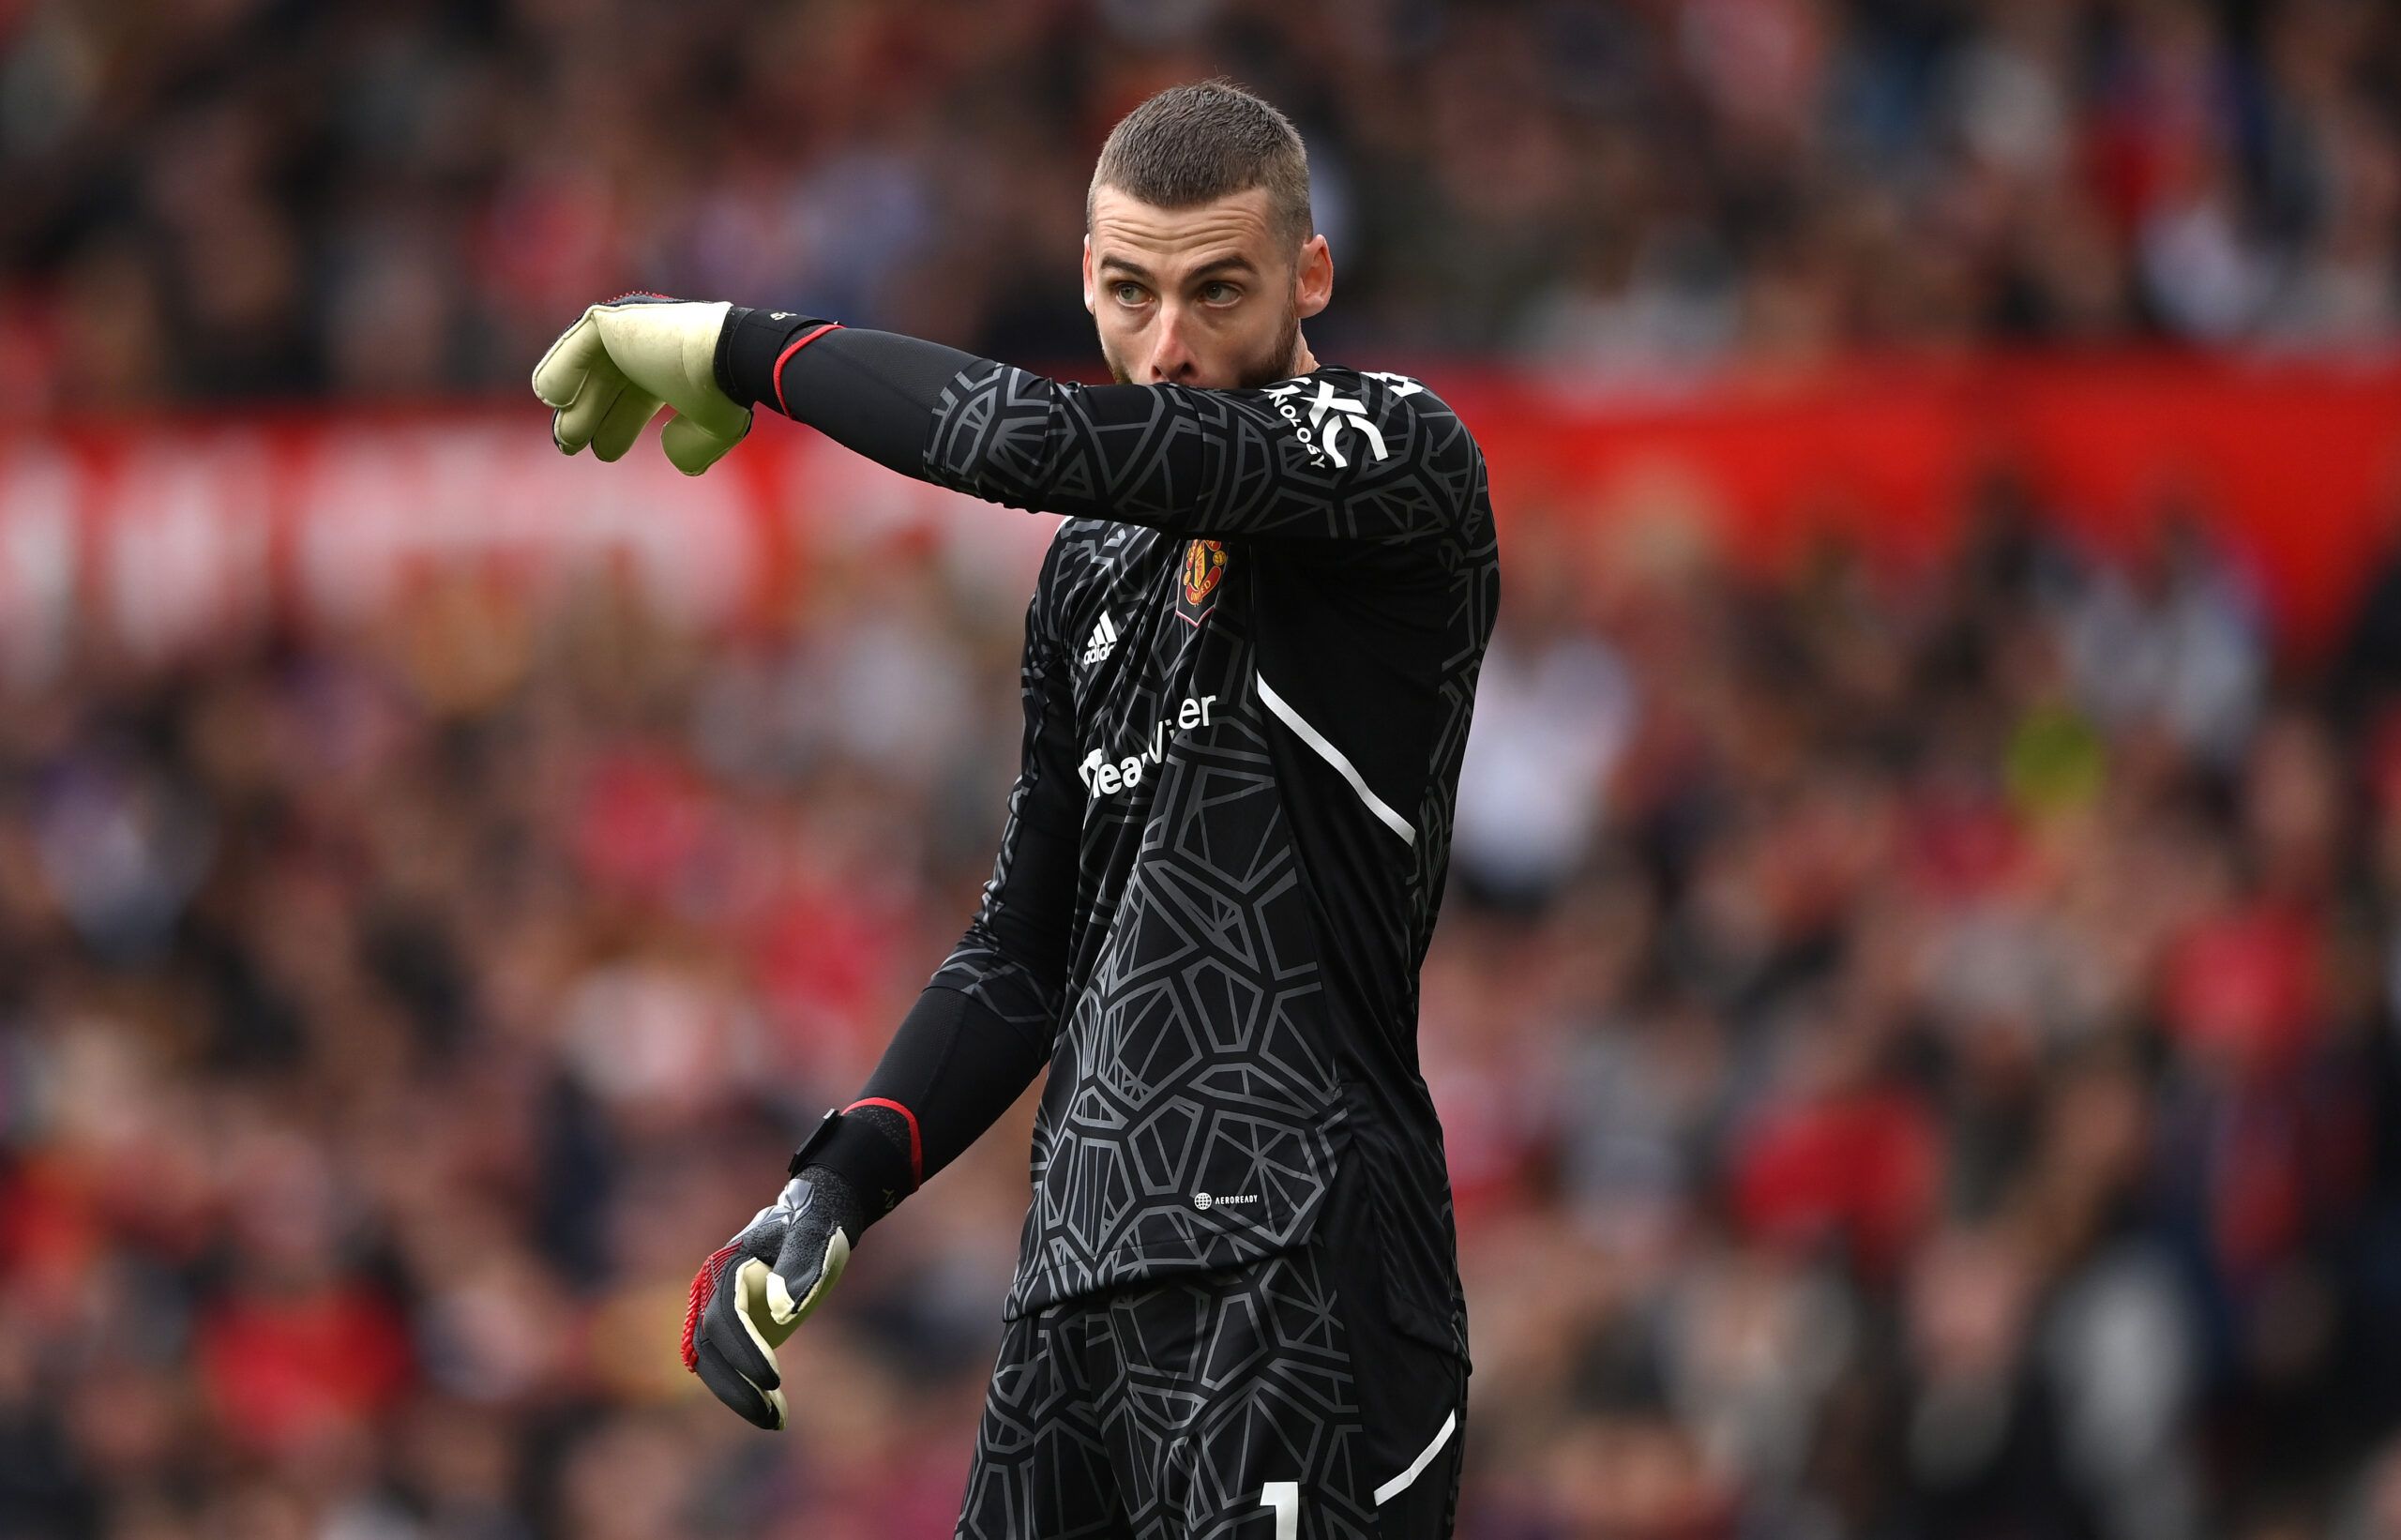 Manchester United goalkeeper David De Gea reacts during the Premier League match between Manchester United and Newcastle United at Old Trafford on October 15, 2022 in Manchester, England.